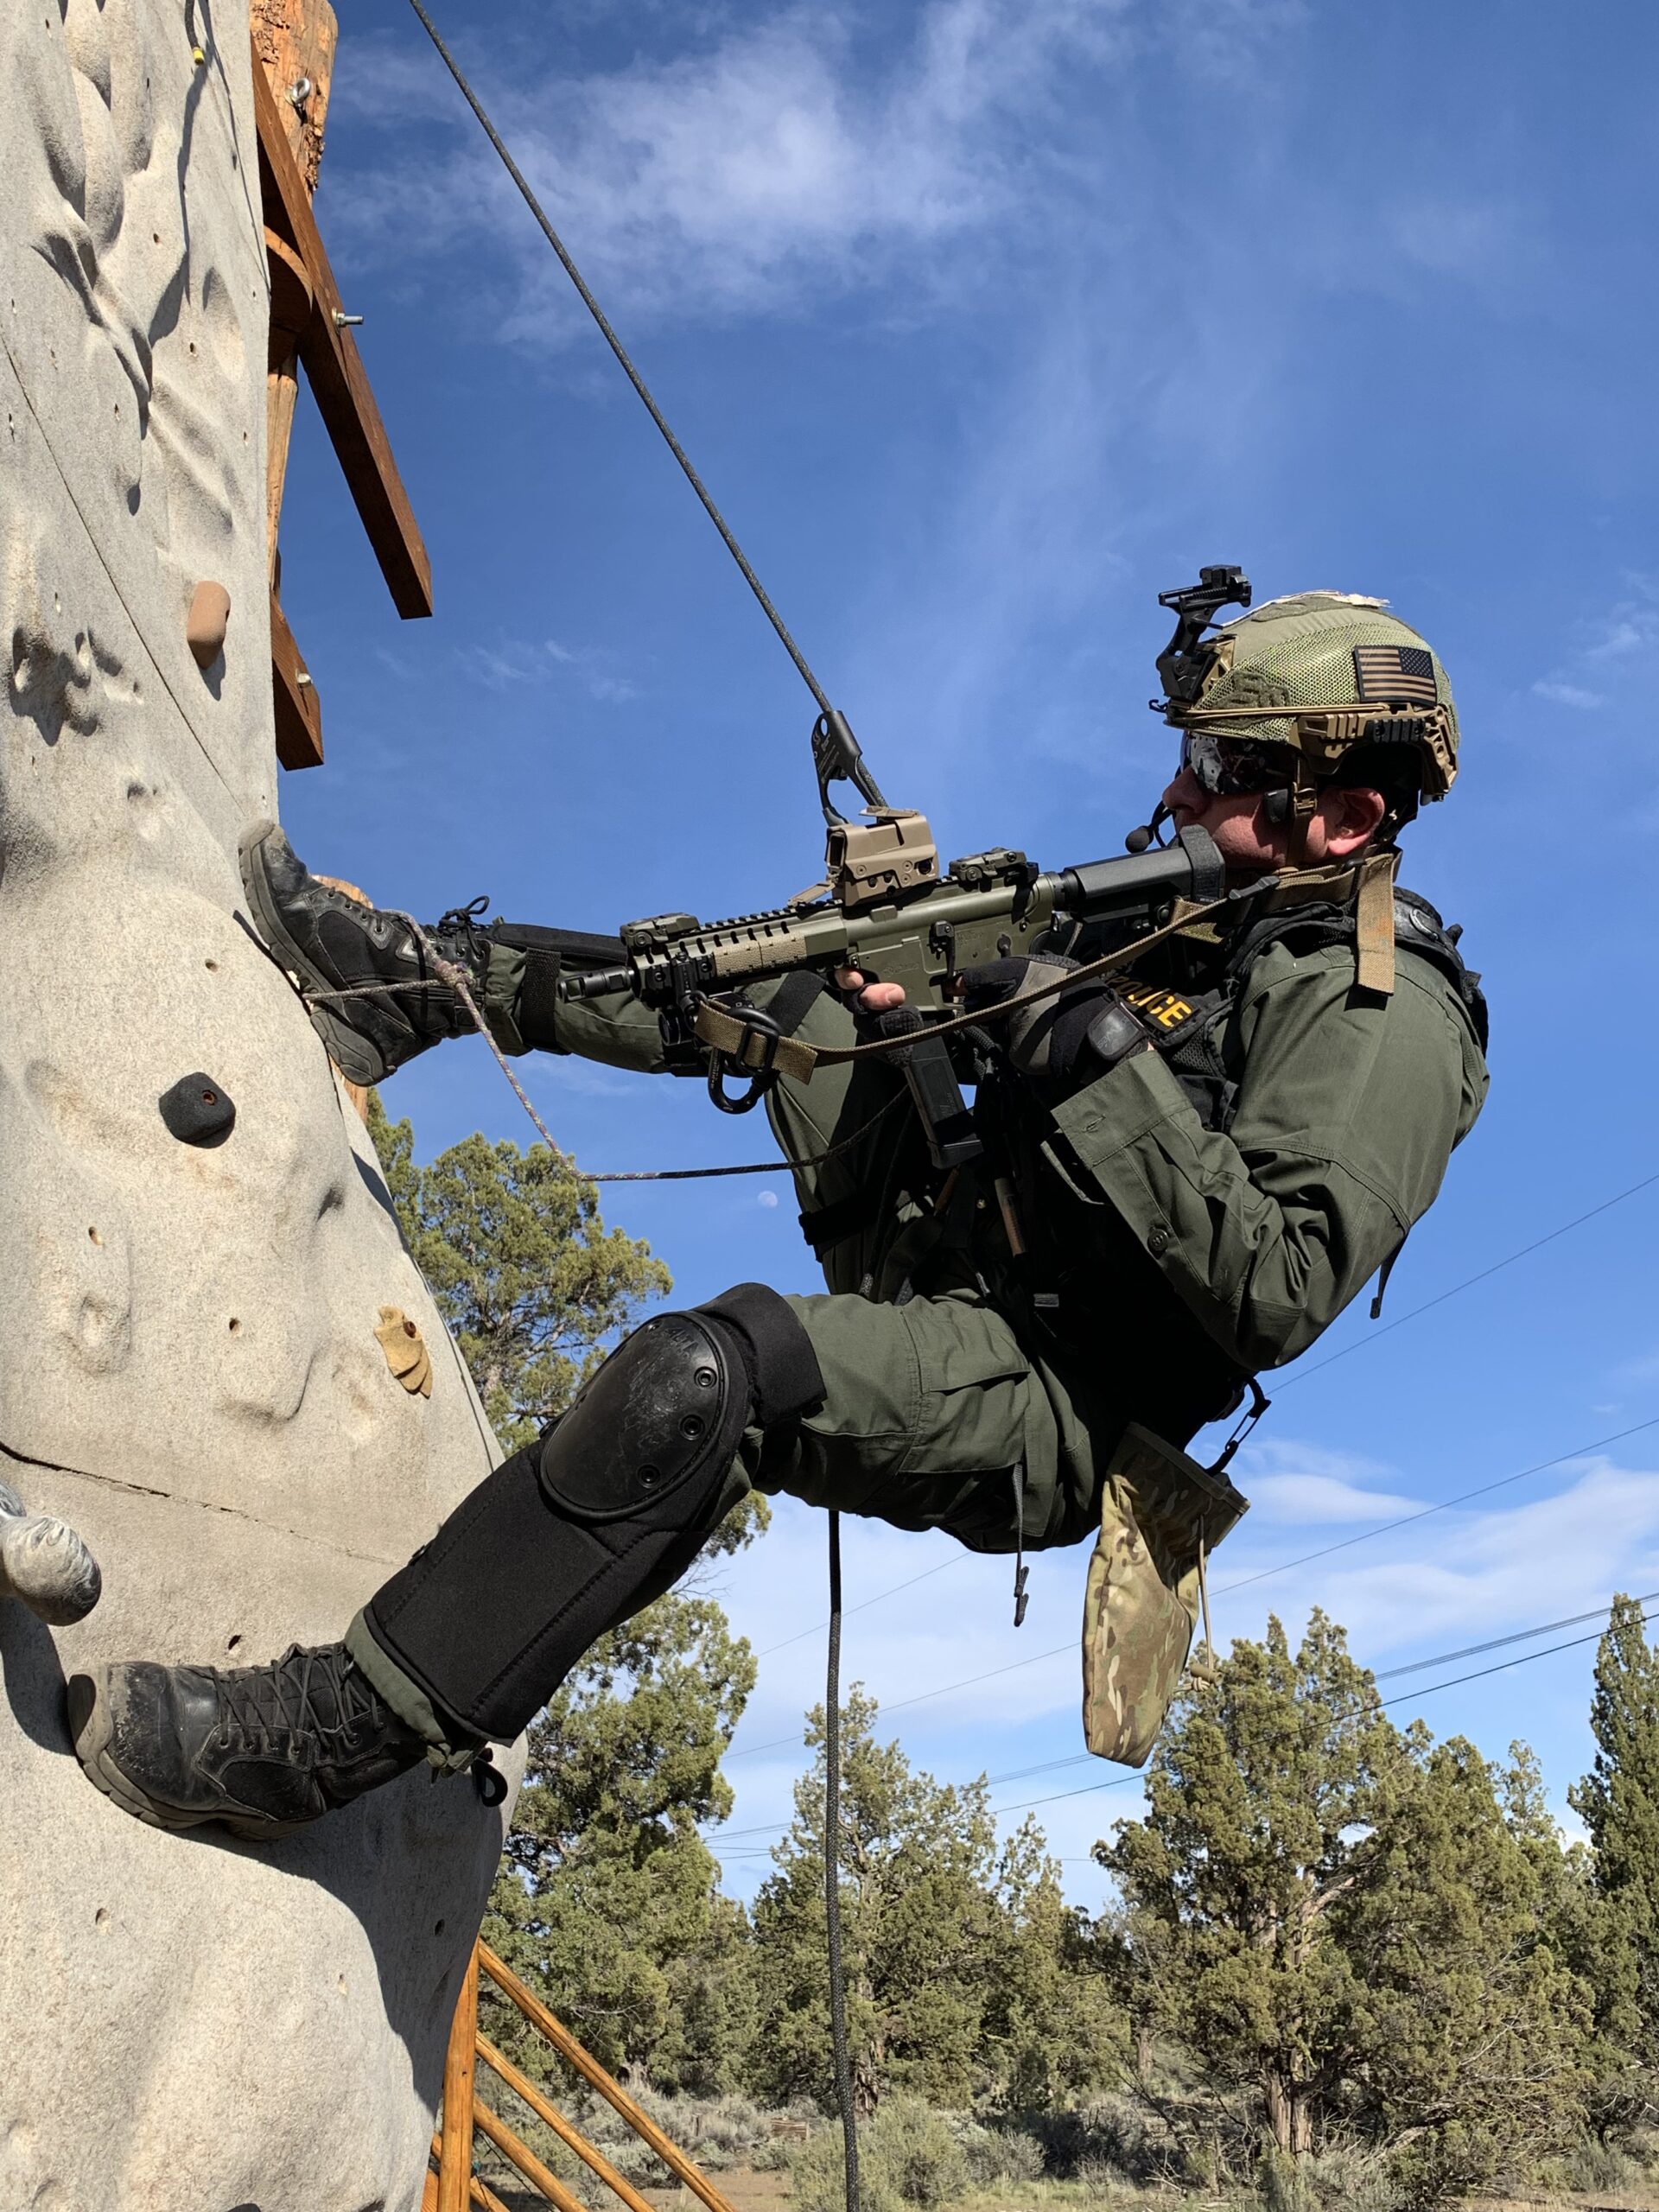 Tactical Rope Safety - Tactical Rappel Training, Police Training